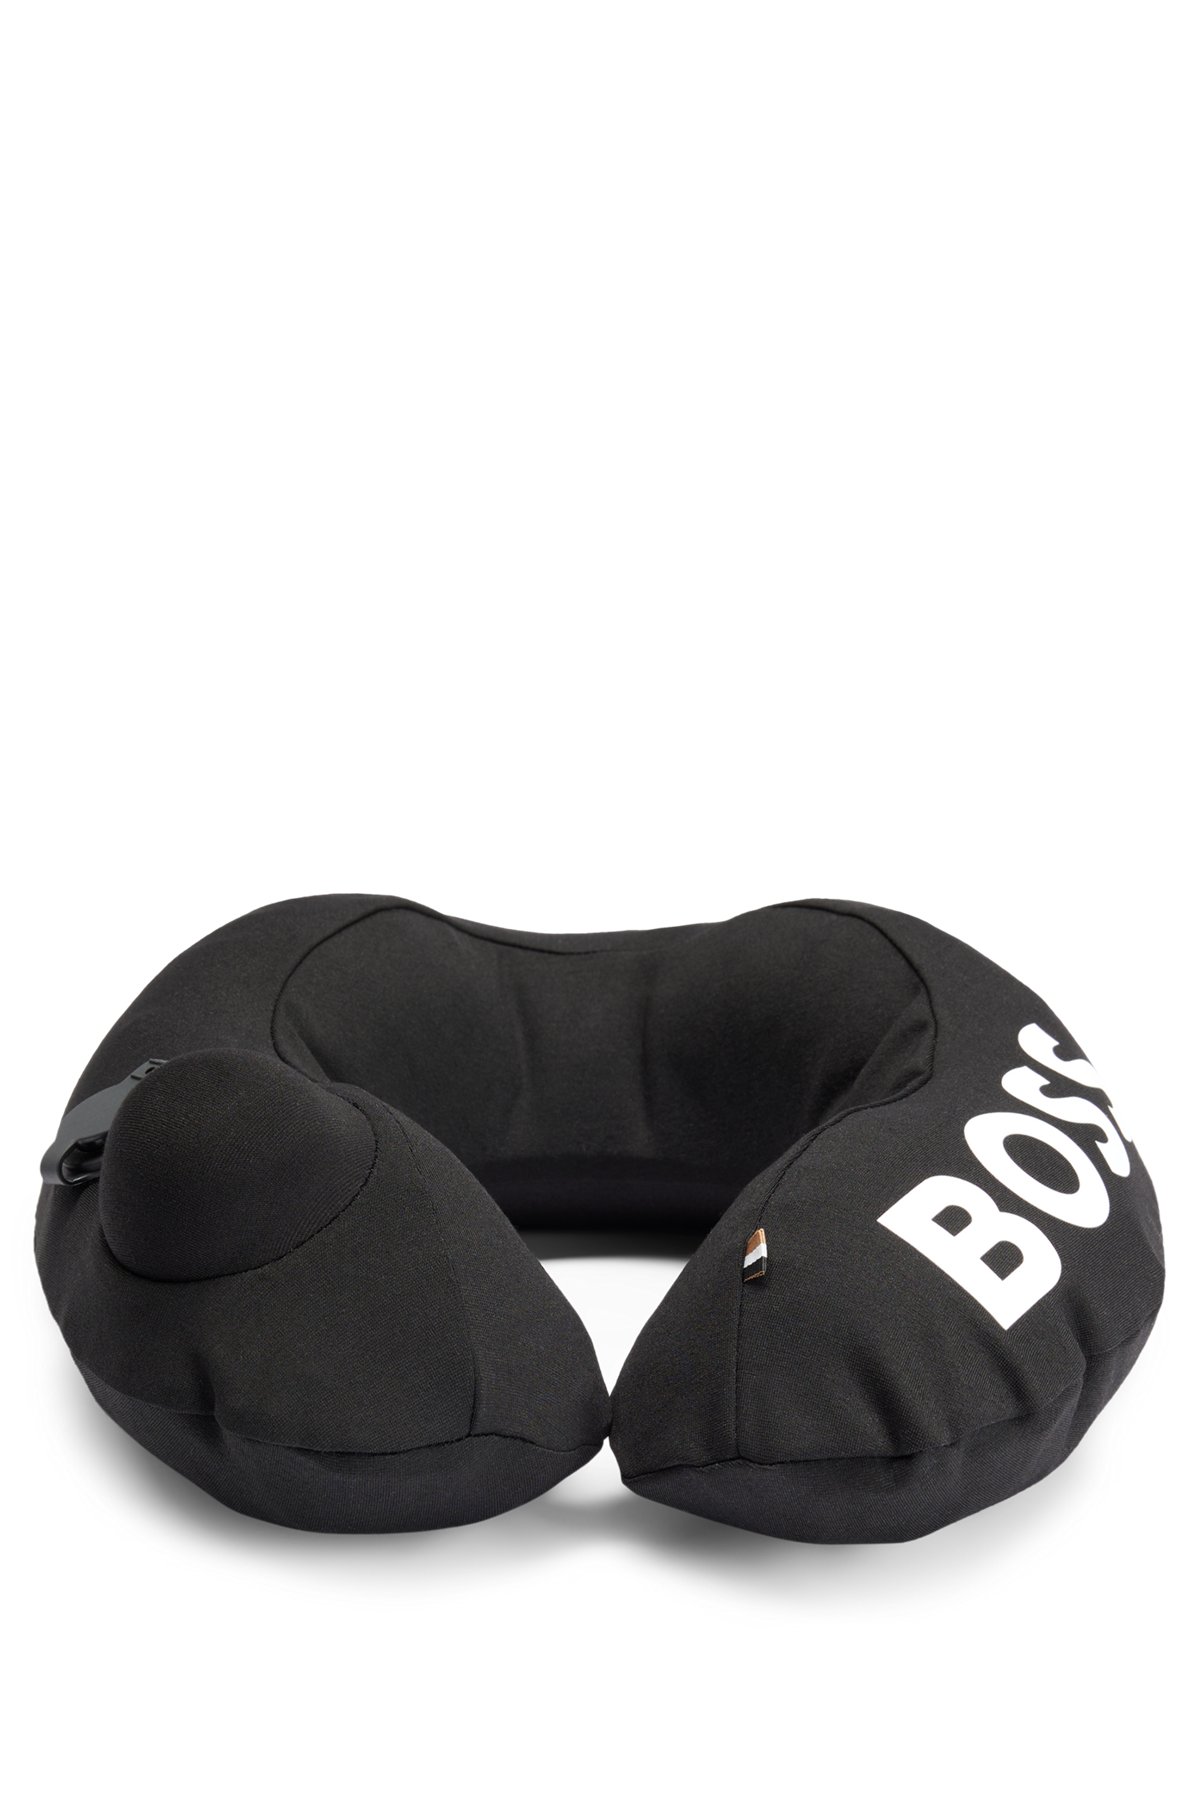 Gift-boxed set with neck pillow and eye mask, Black